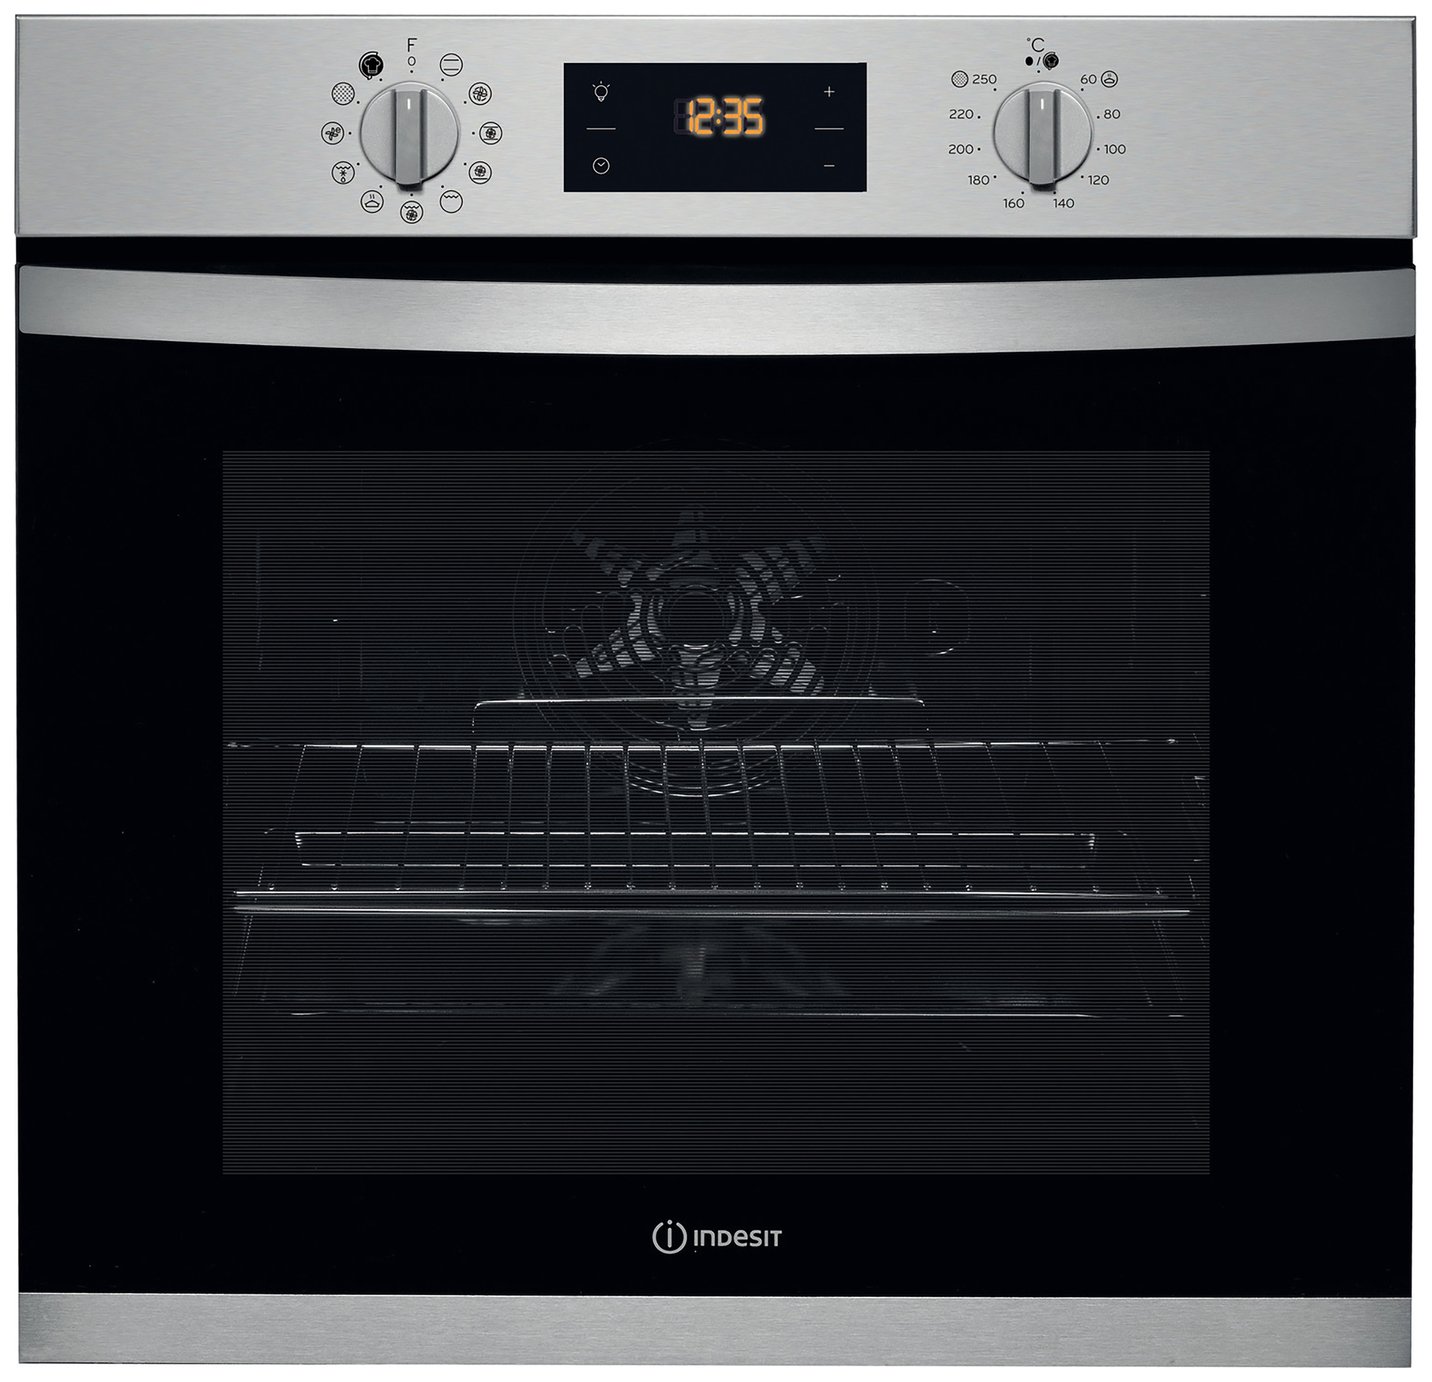 Indesit IFW 3841PIXUK Built In Single Electric Oven -S/Steel